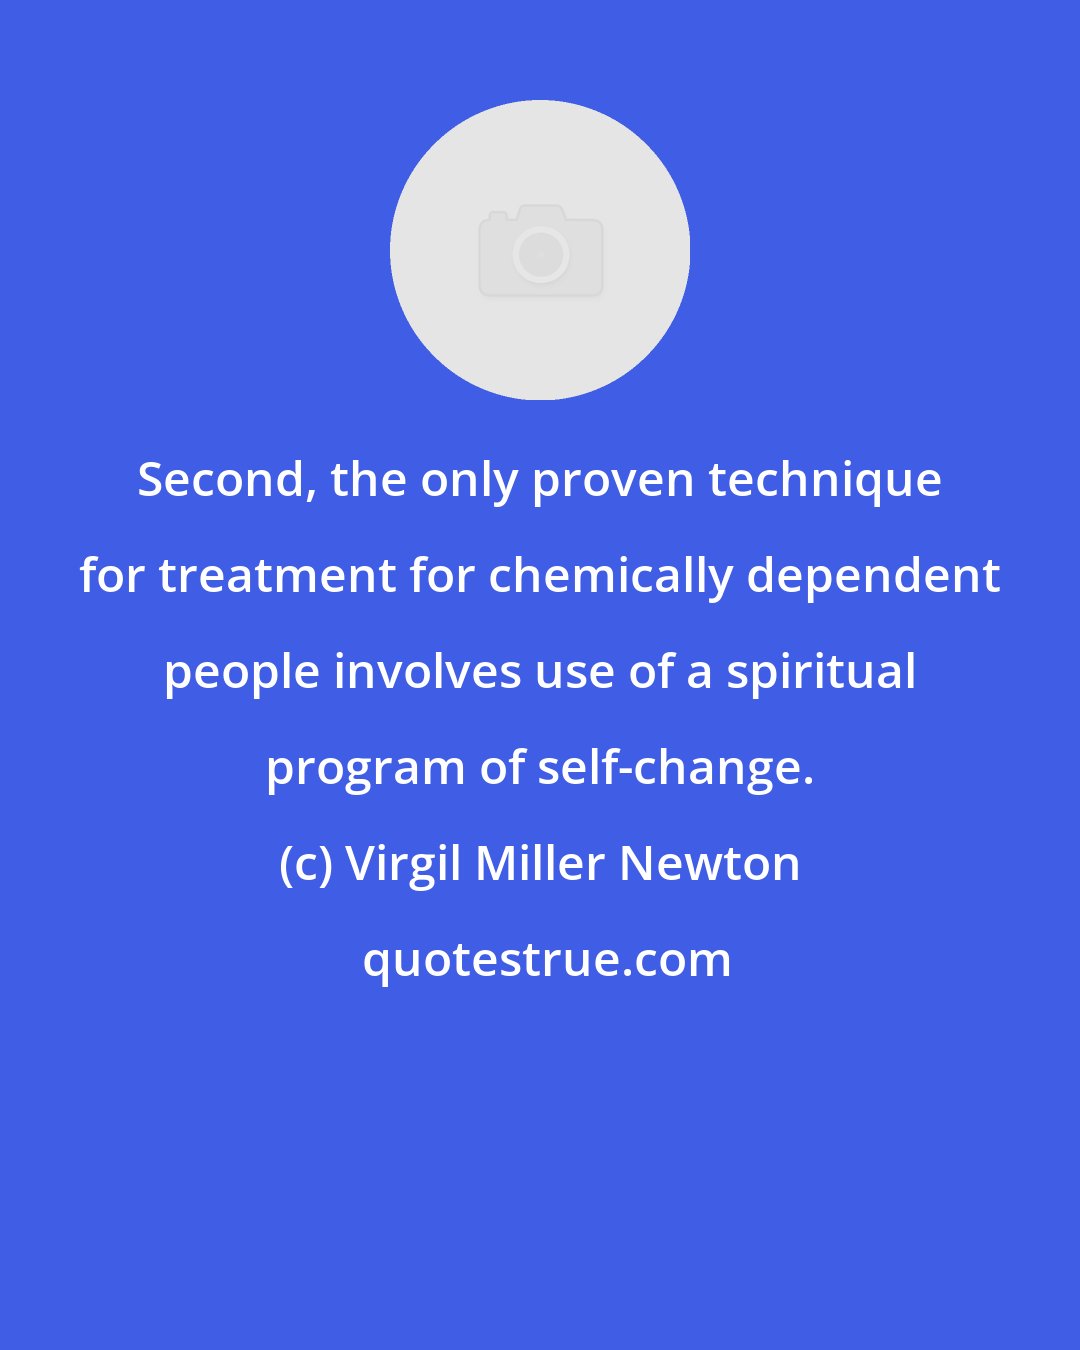 Virgil Miller Newton: Second, the only proven technique for treatment for chemically dependent people involves use of a spiritual program of self-change.